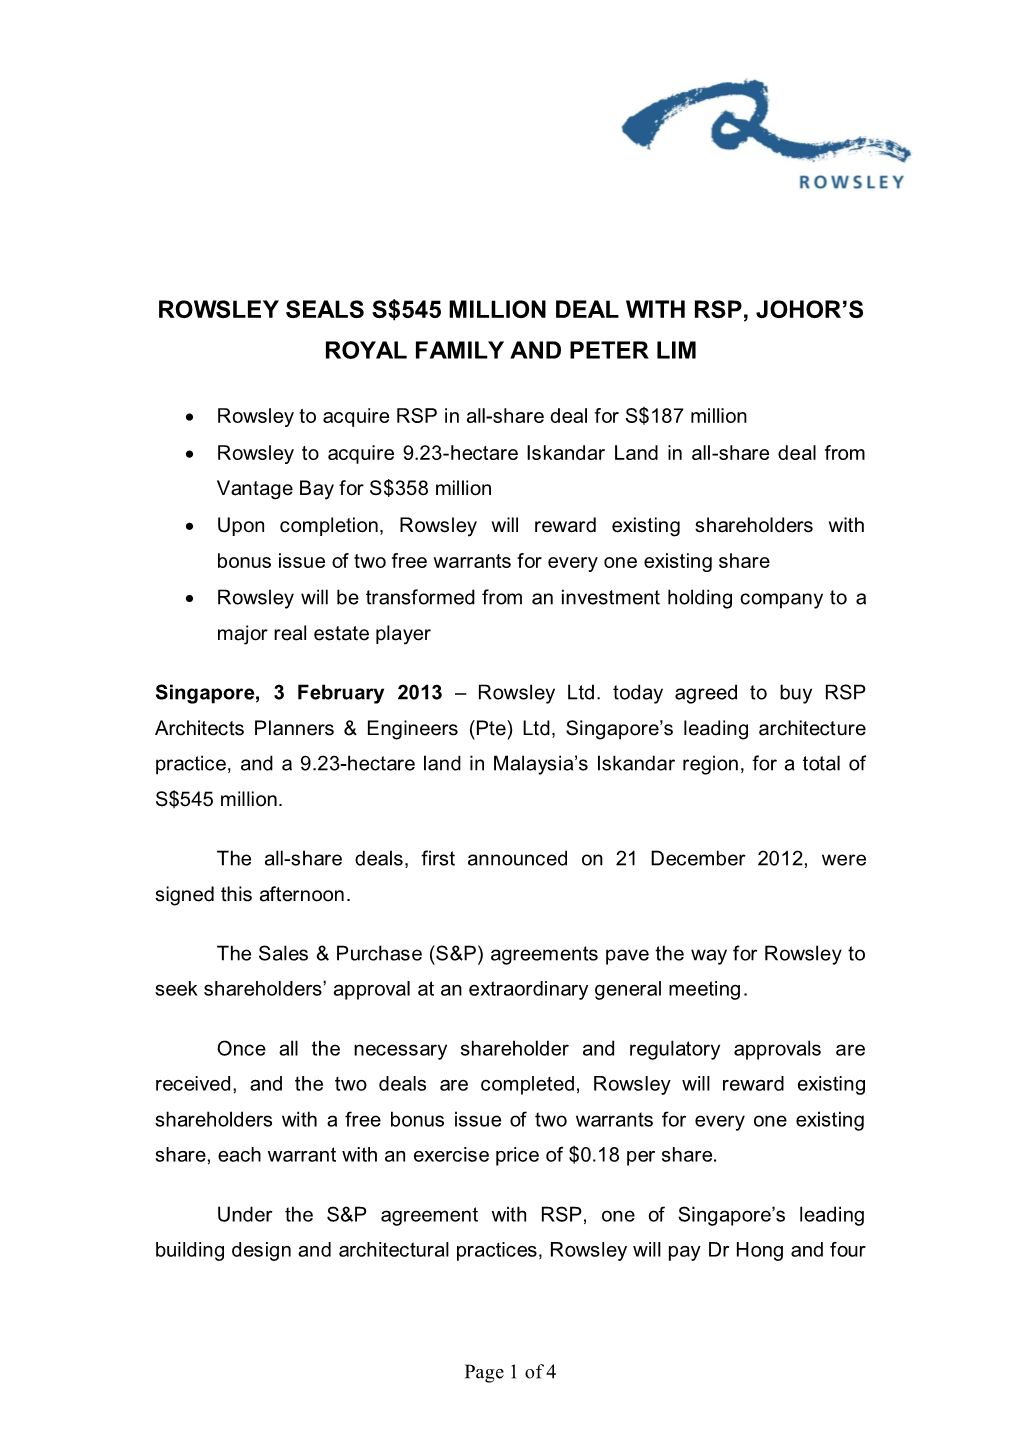 Rowsley Seals S$545 Million Deal with Rsp, Johor's Royal Family and Peter